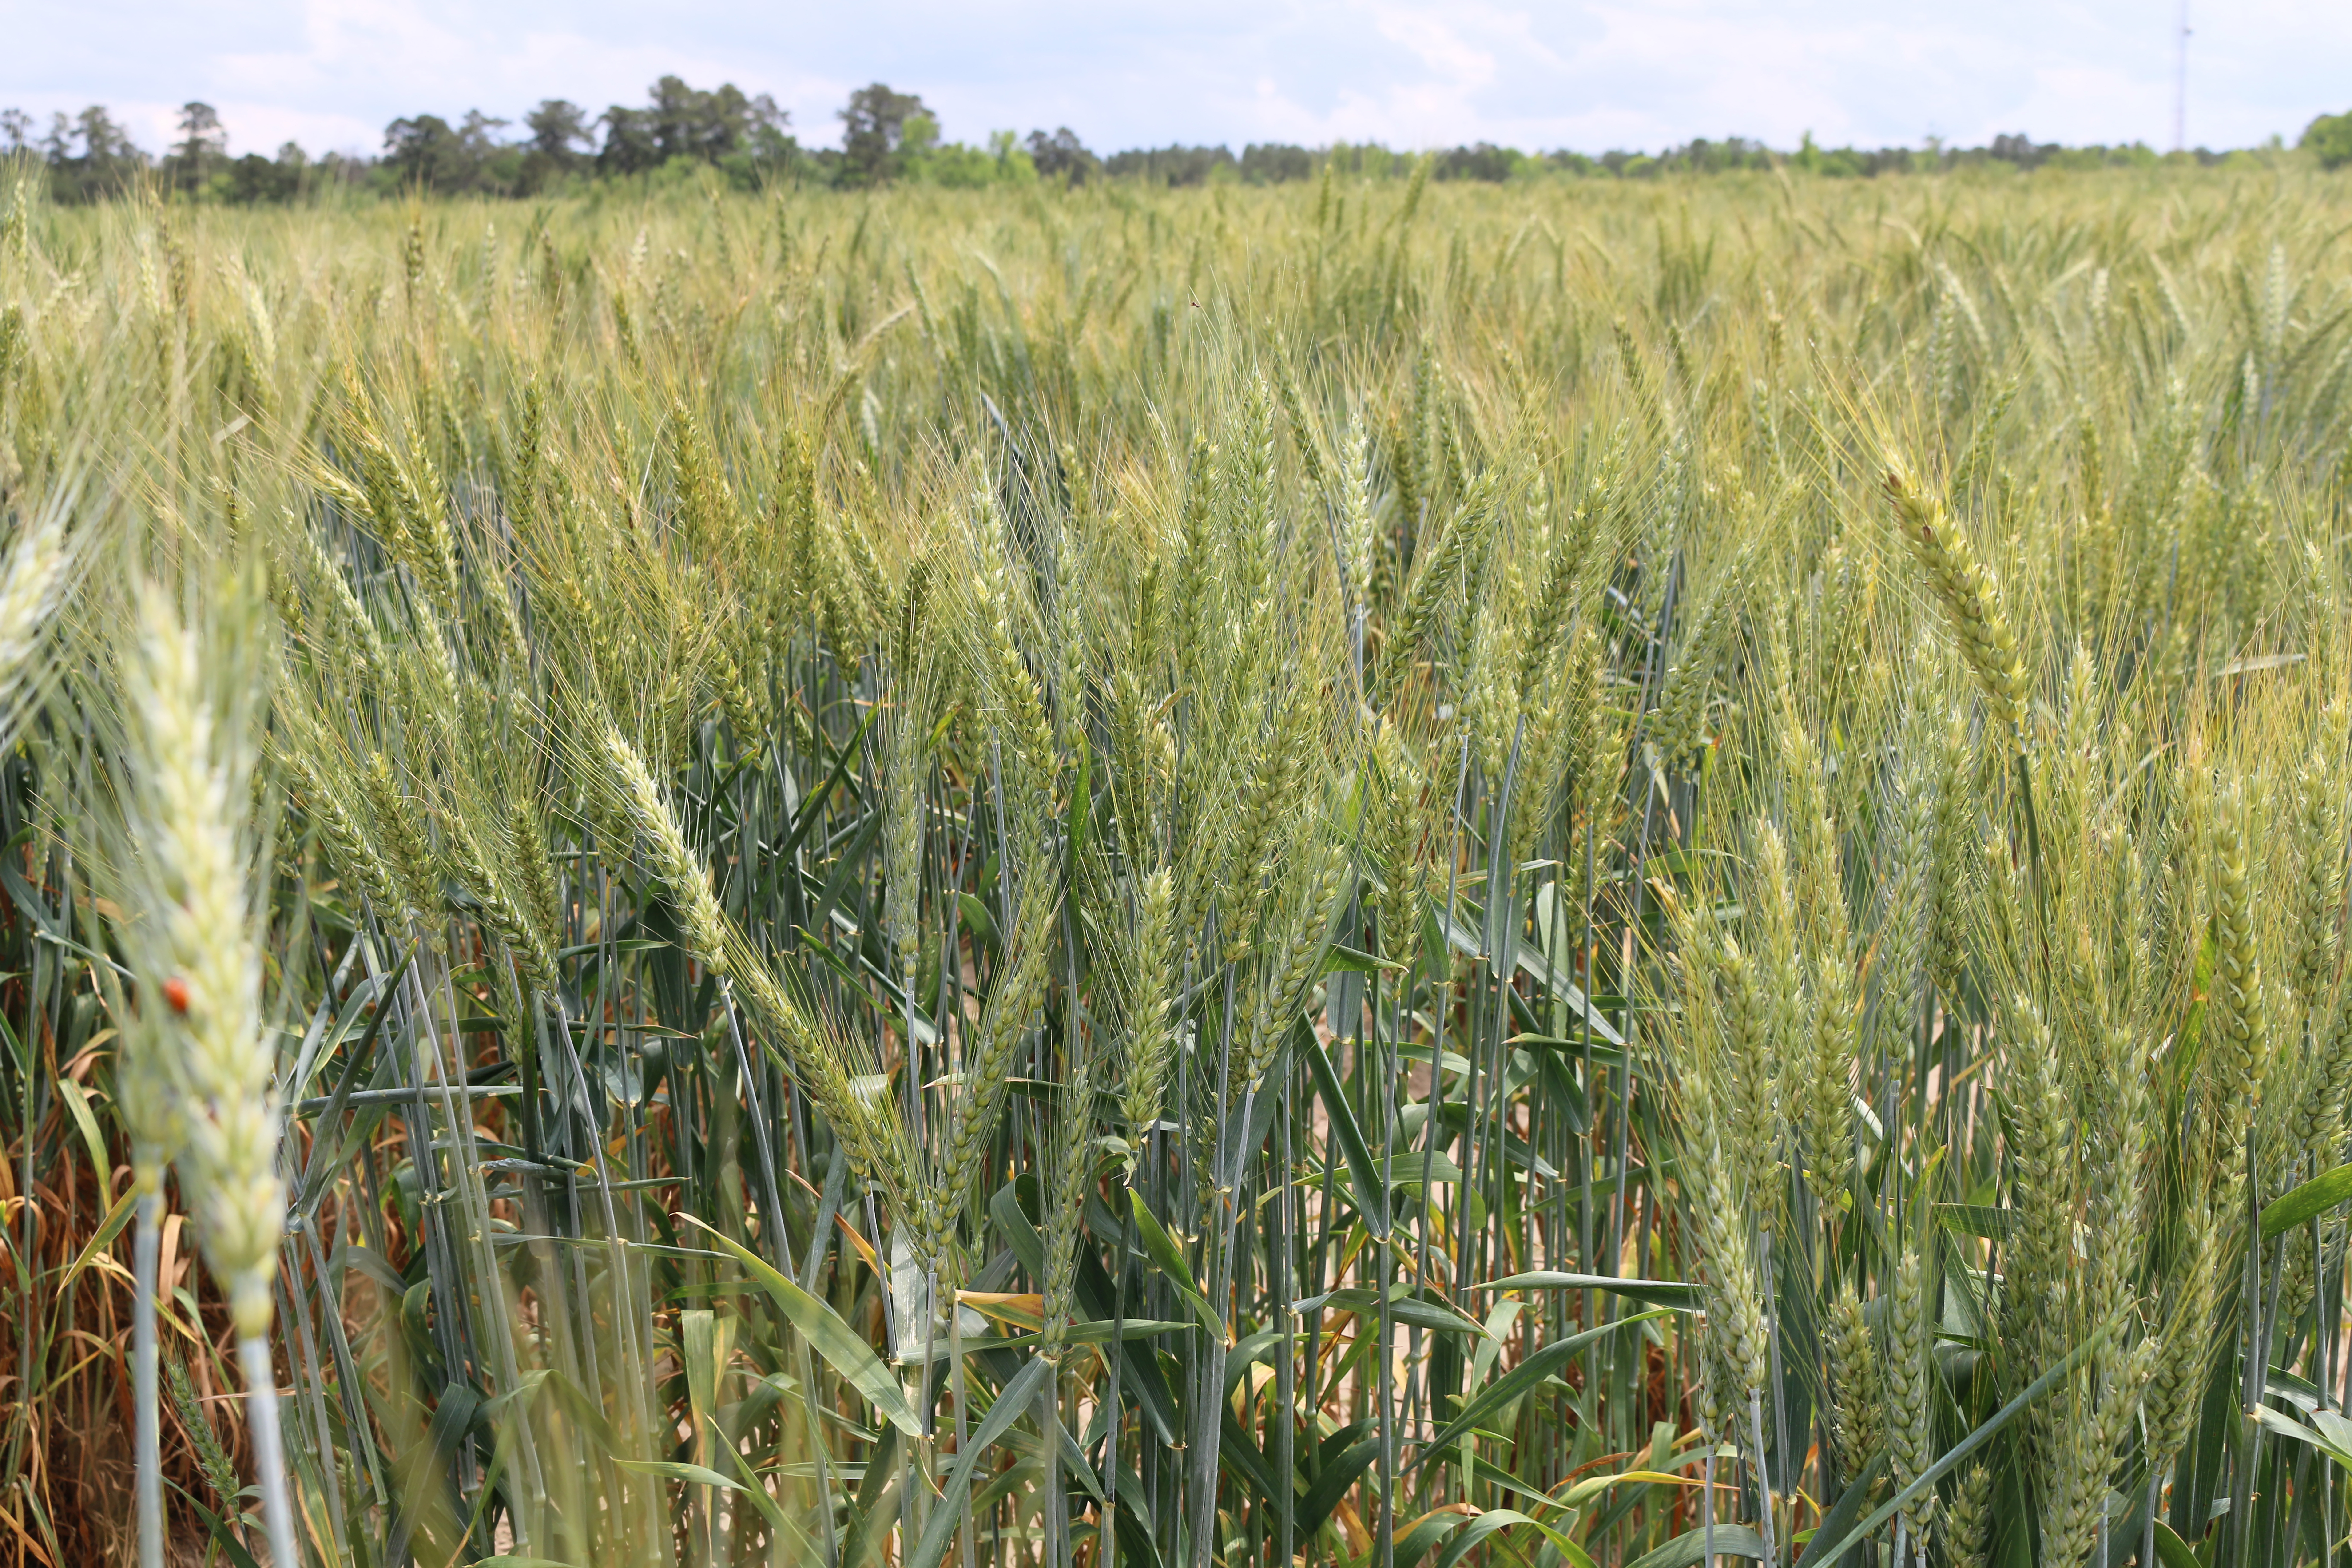 This research is being conducted on wheat grown in fields and tested in laboratories in Clemson’s Advanced Plant Technology Program located at the Pee Dee REC.